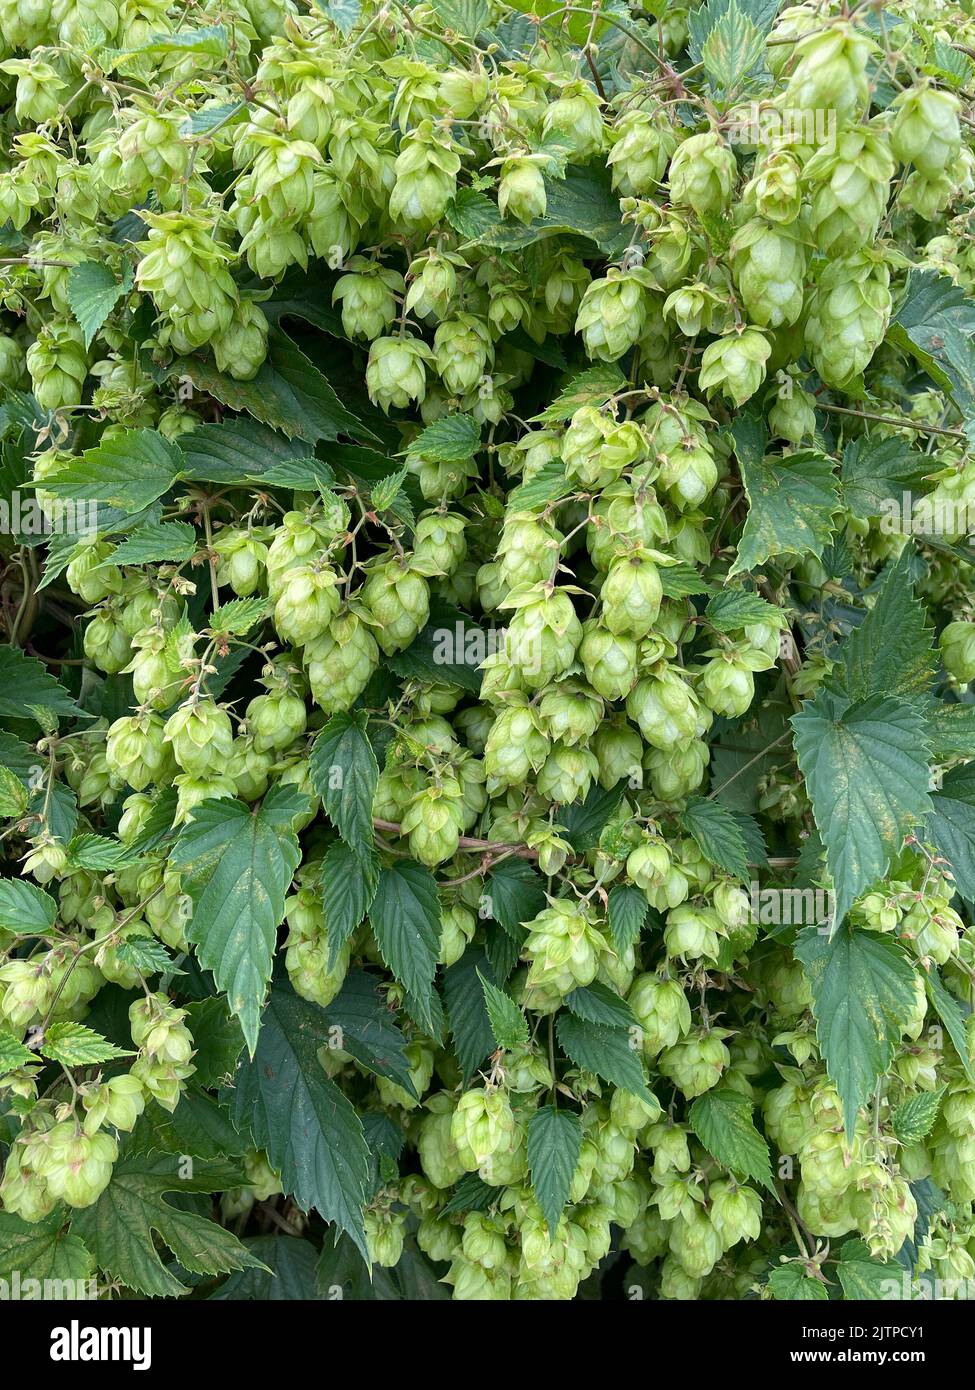 HOPES The fruit 0r seed cone of the Hop Plant Humulus lupulus. Phot6o: Tony Gale Stock Photo